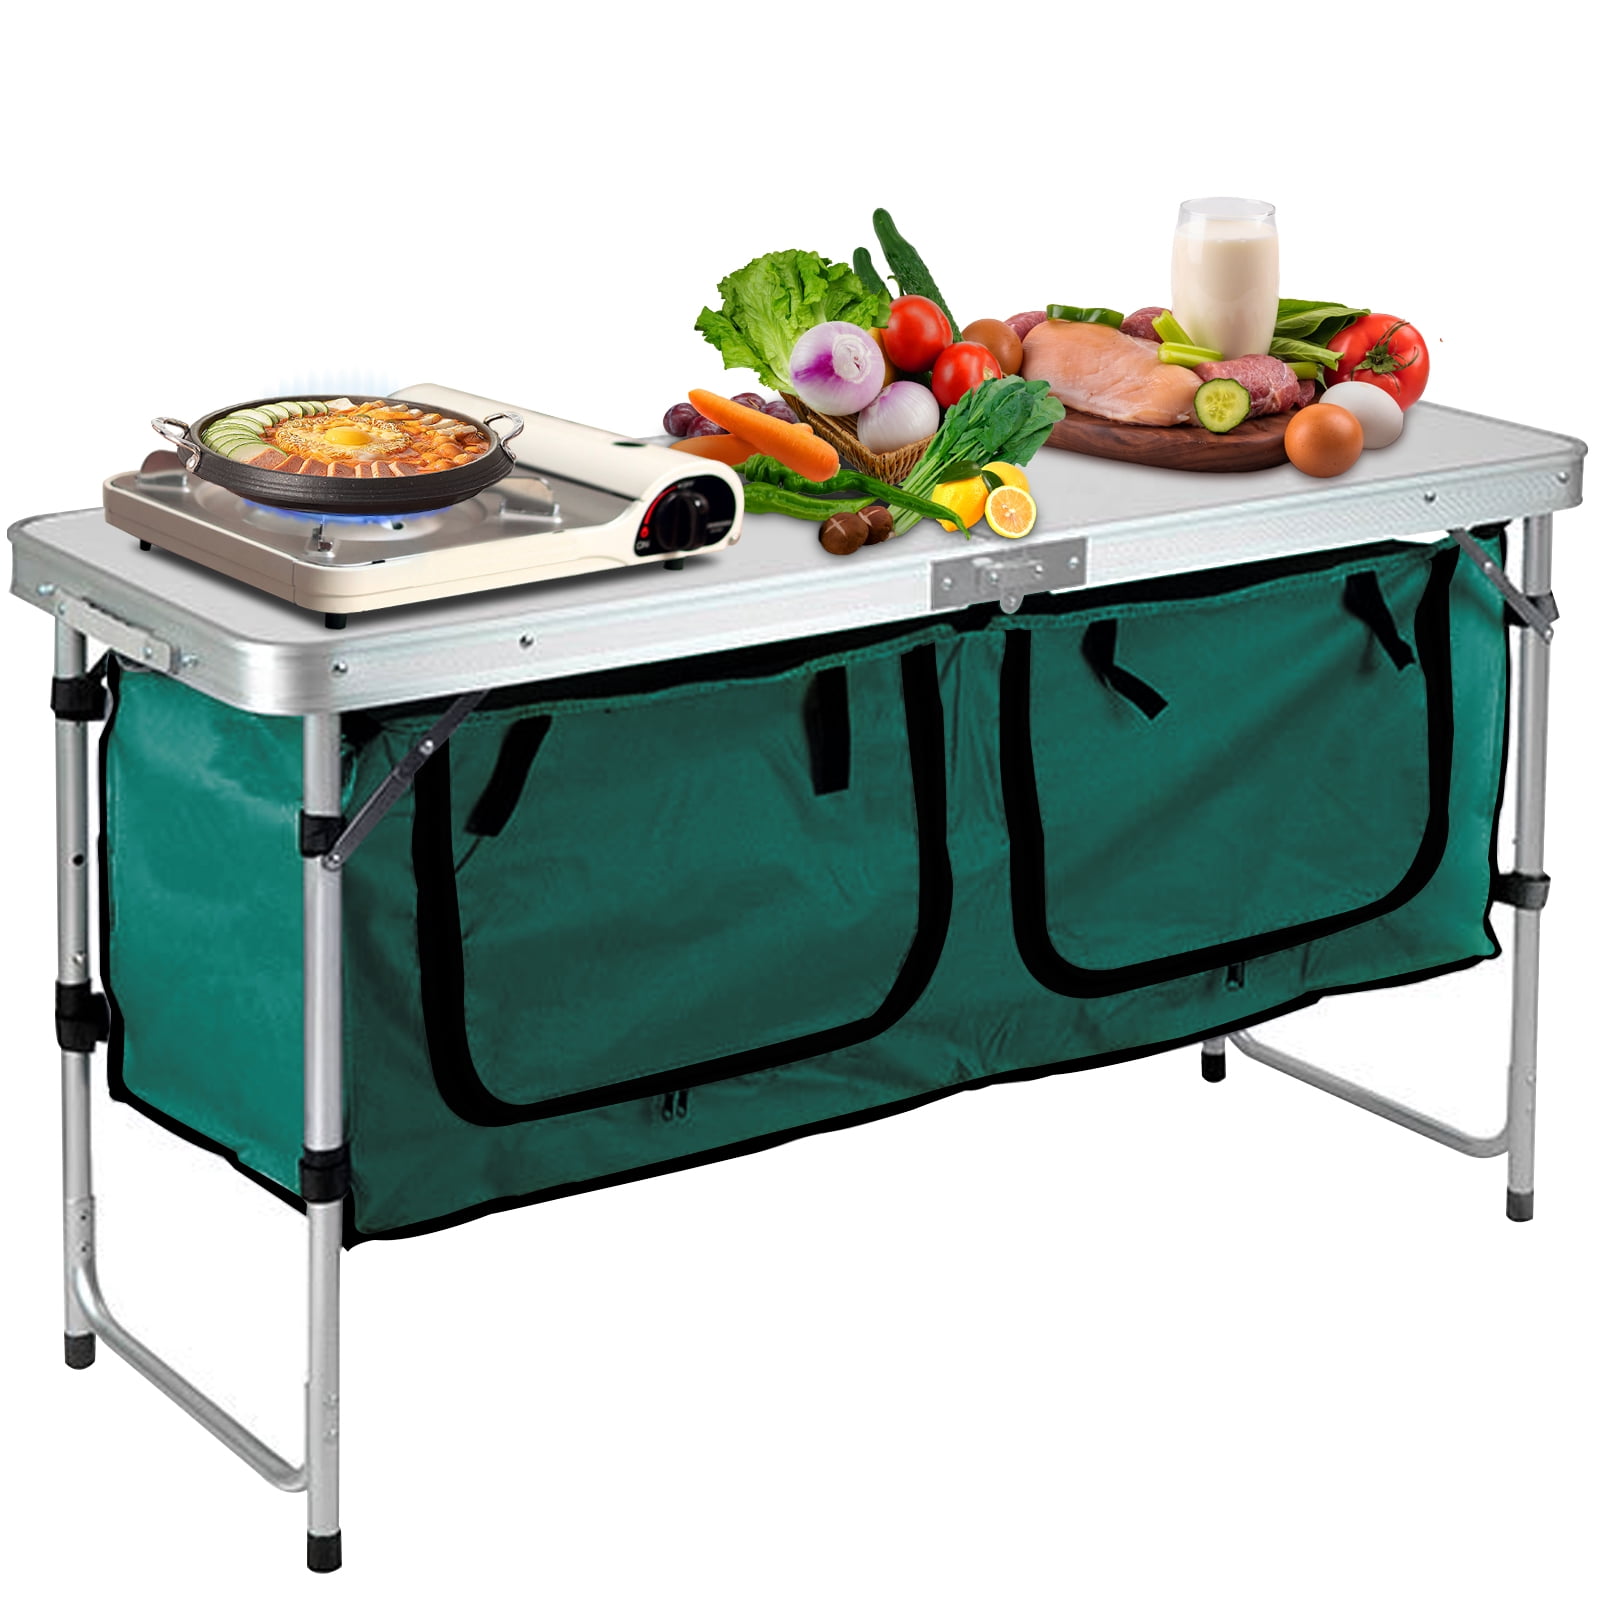 VEVOR Camping Outdoor Kitchen Table Cabinet Foldable Folding Cooking  Storage Rack X-Shaped Aluminum Alloy Bracket for BBQ Picnic